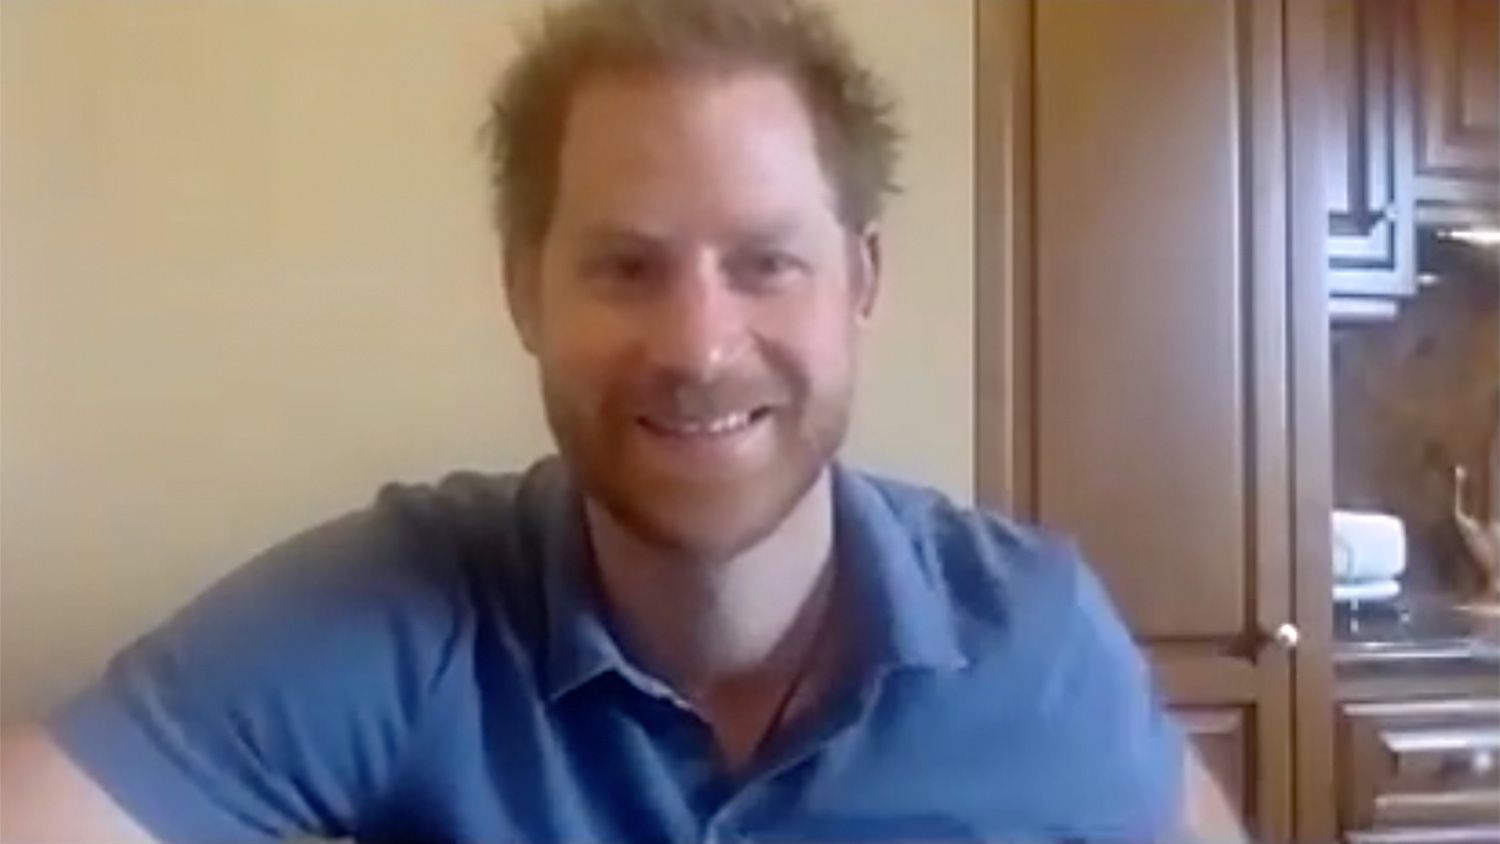 Prince Harry on a call with a charity, WellChild.